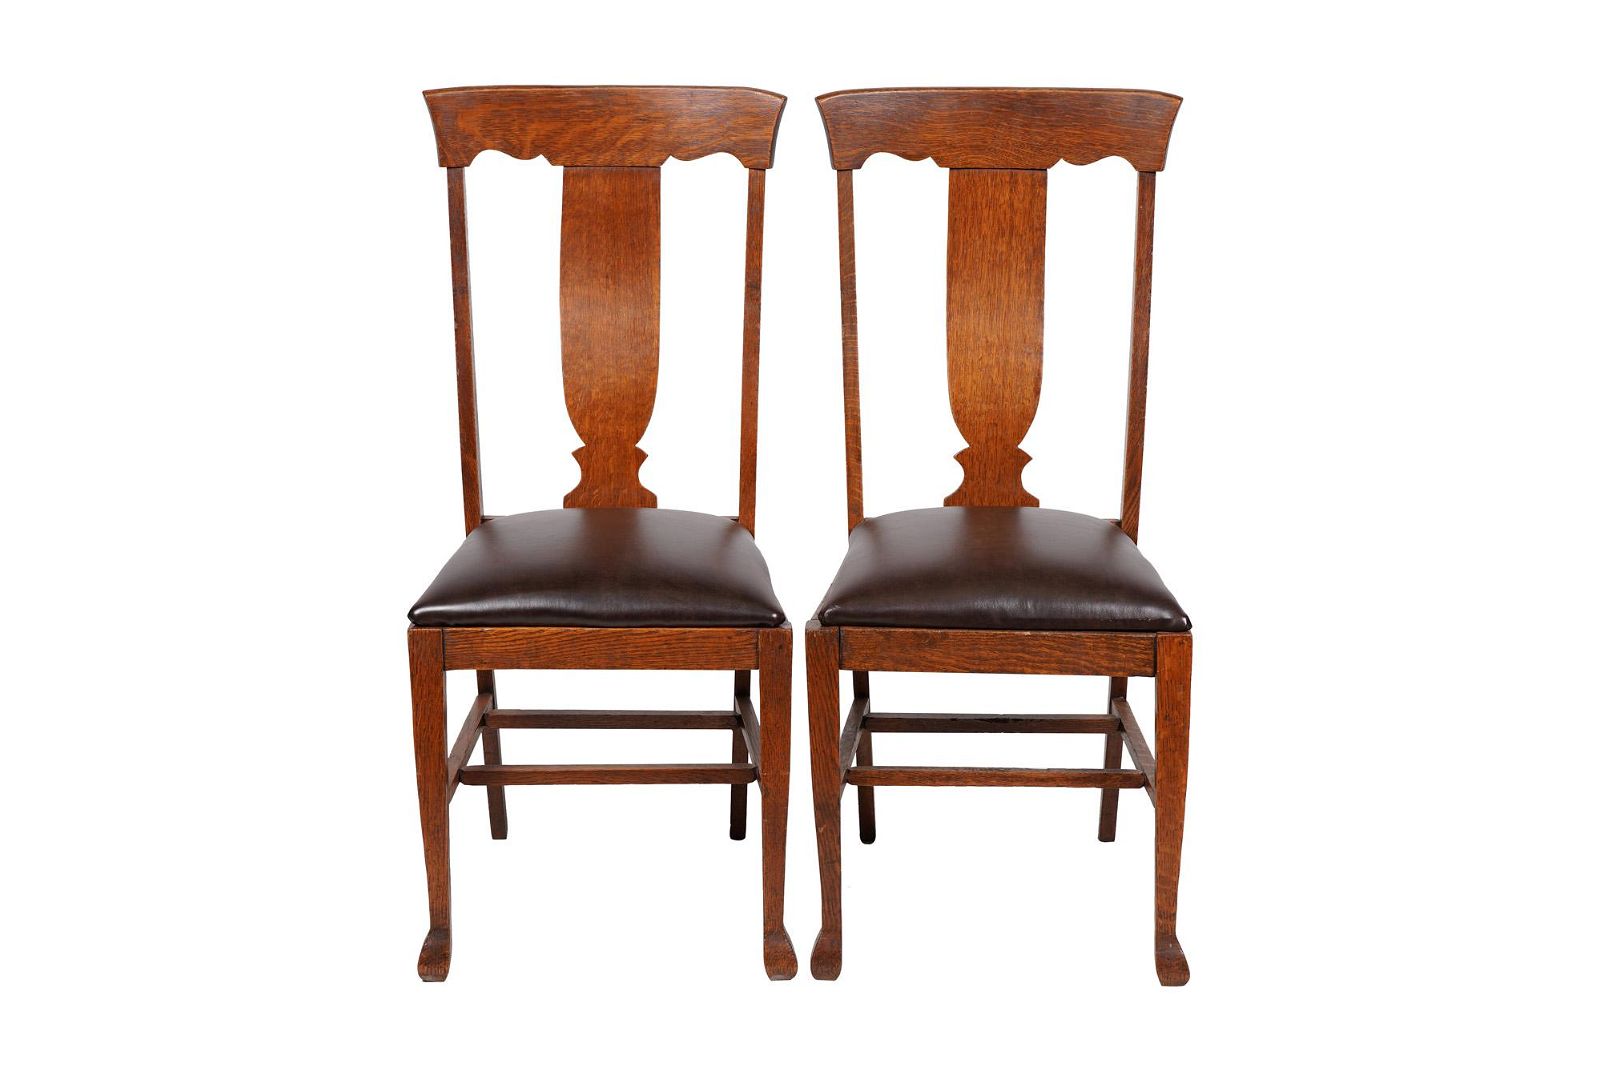 ANTIQUE AMERICAN OAK DINING CHAIRS | Work of Man